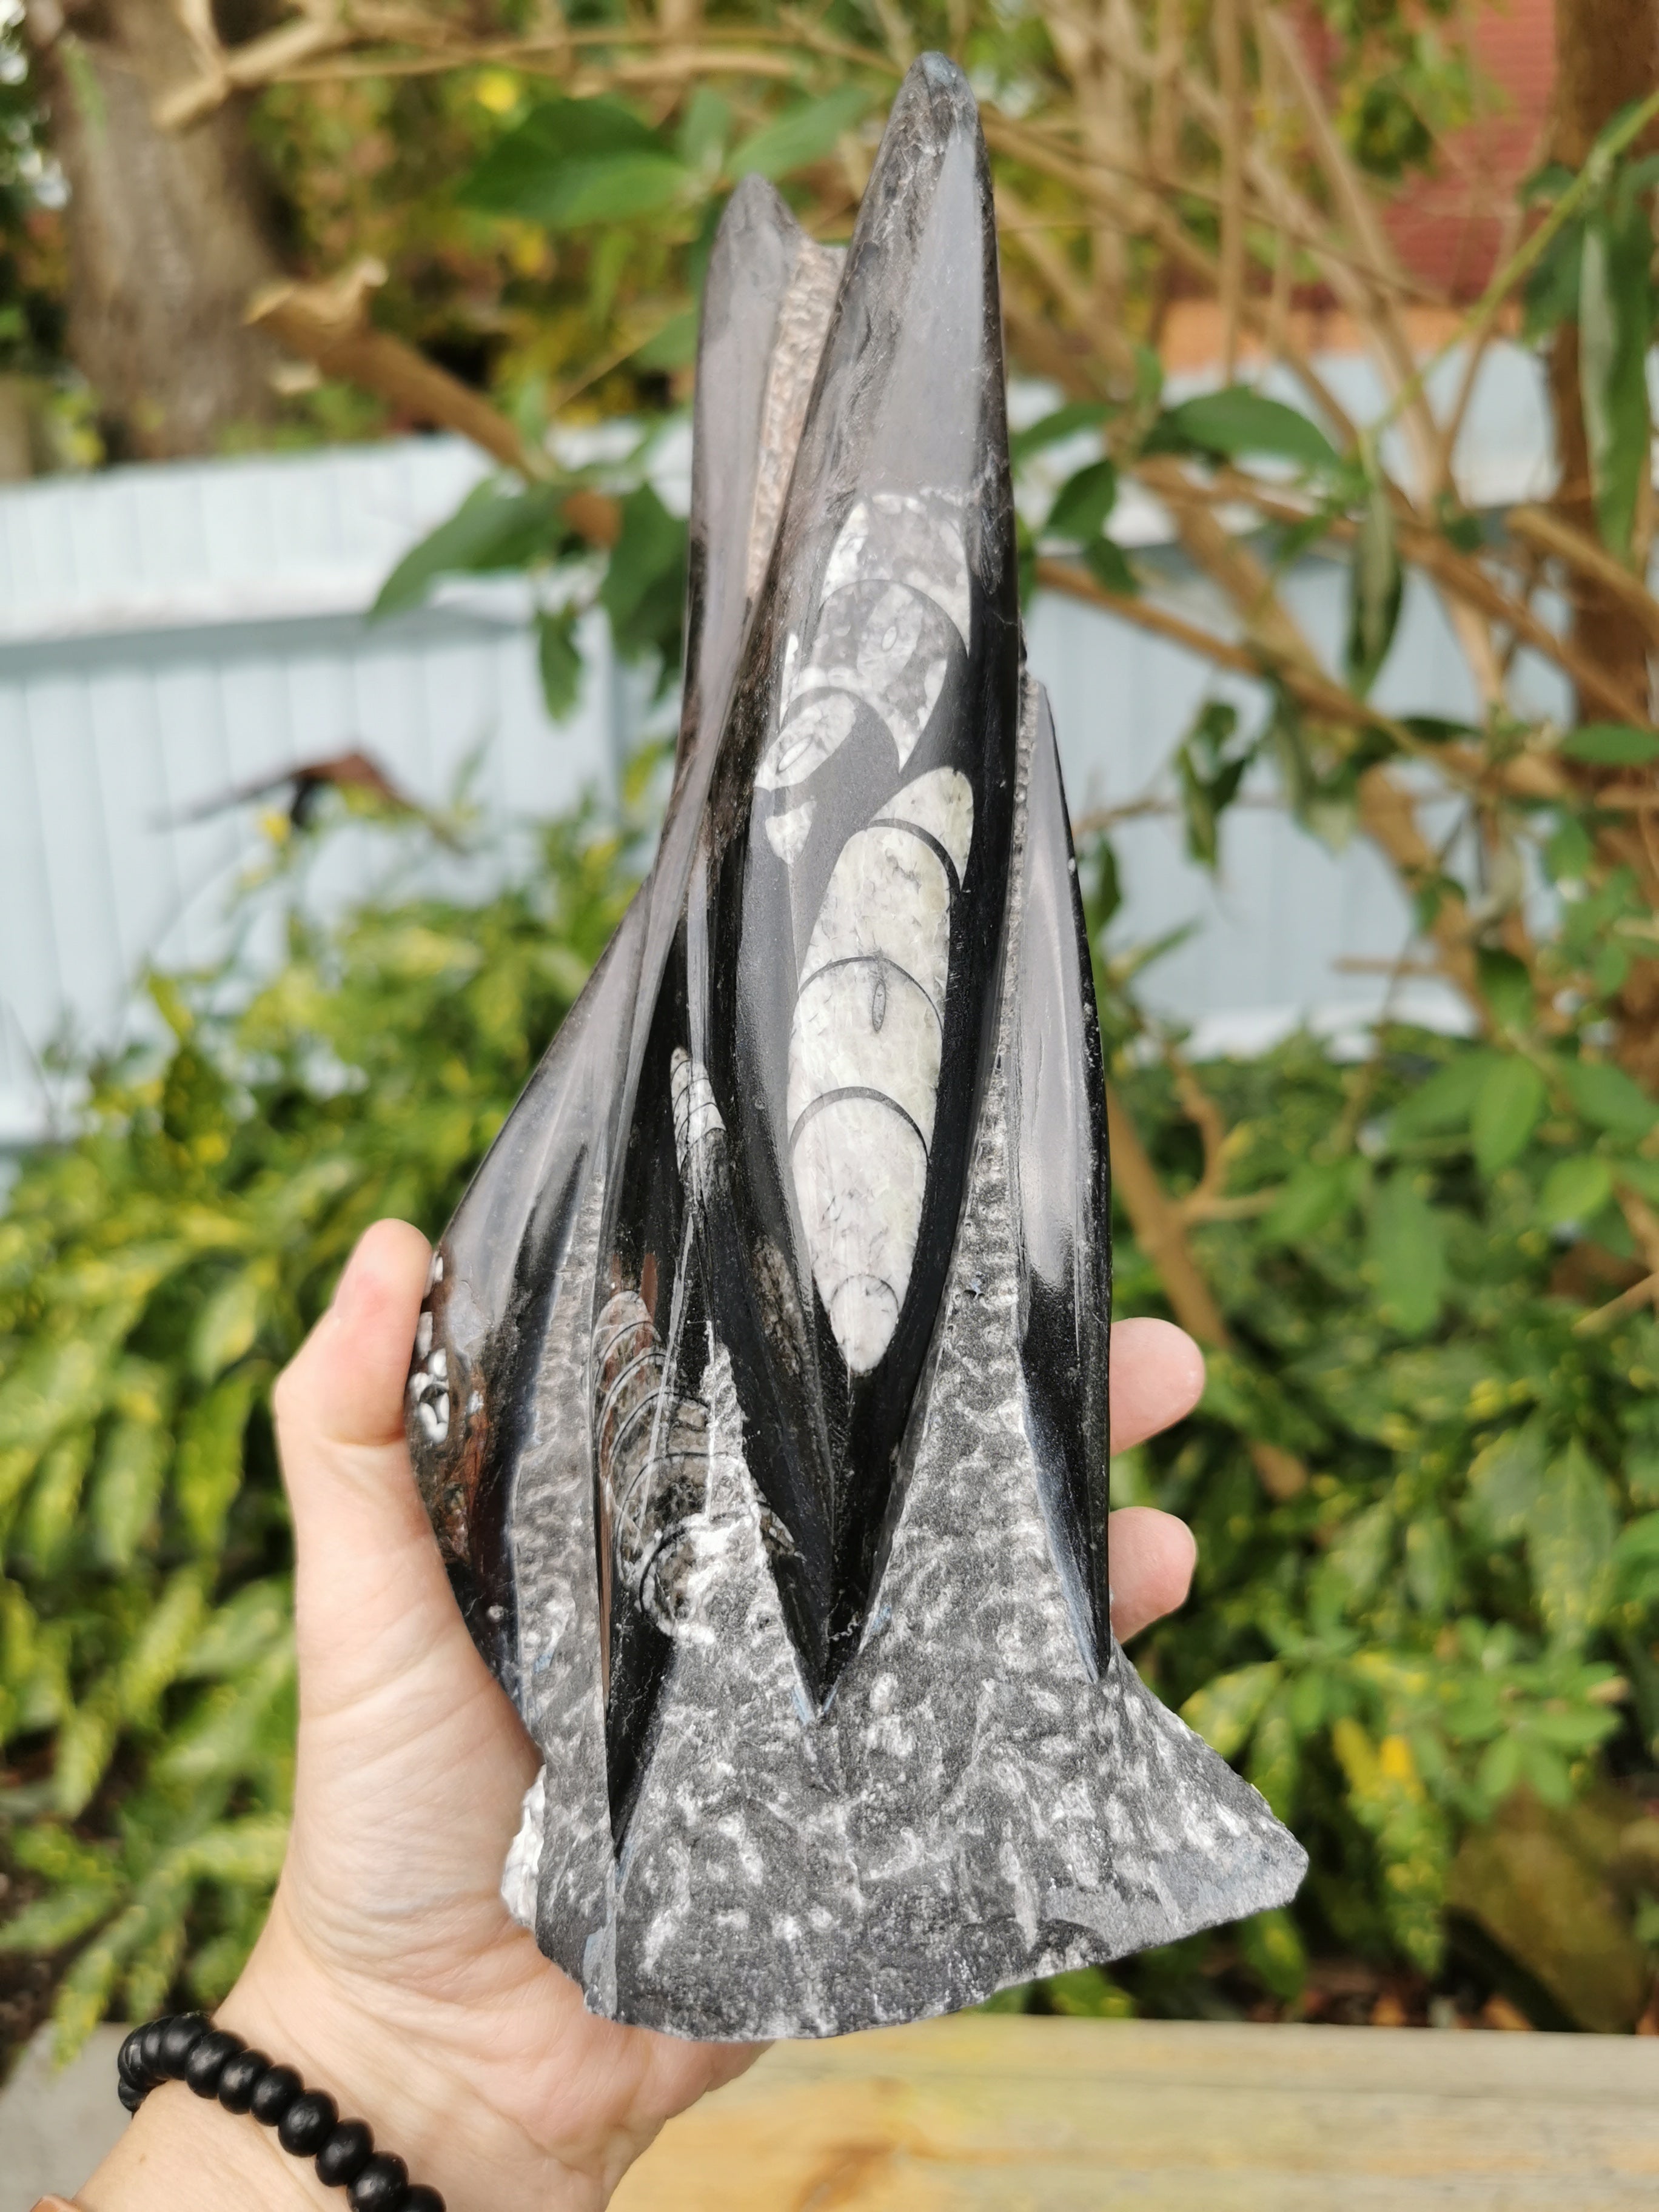 Orthoceras Statue - 6 Polished Fossils in Natural Stone Matrix